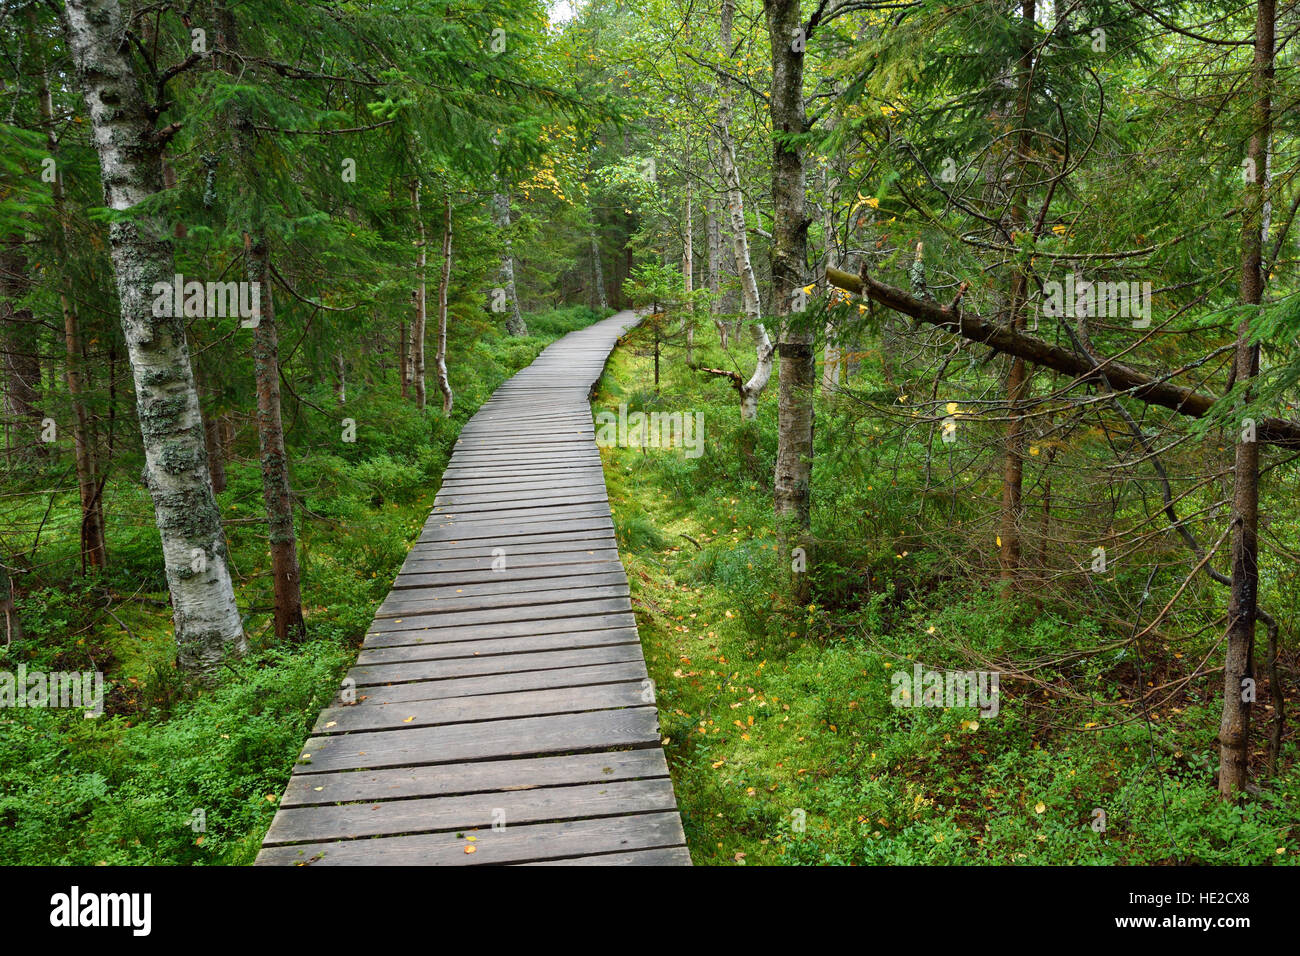 Narrow wooden pathway in the forest fen Stock Photo